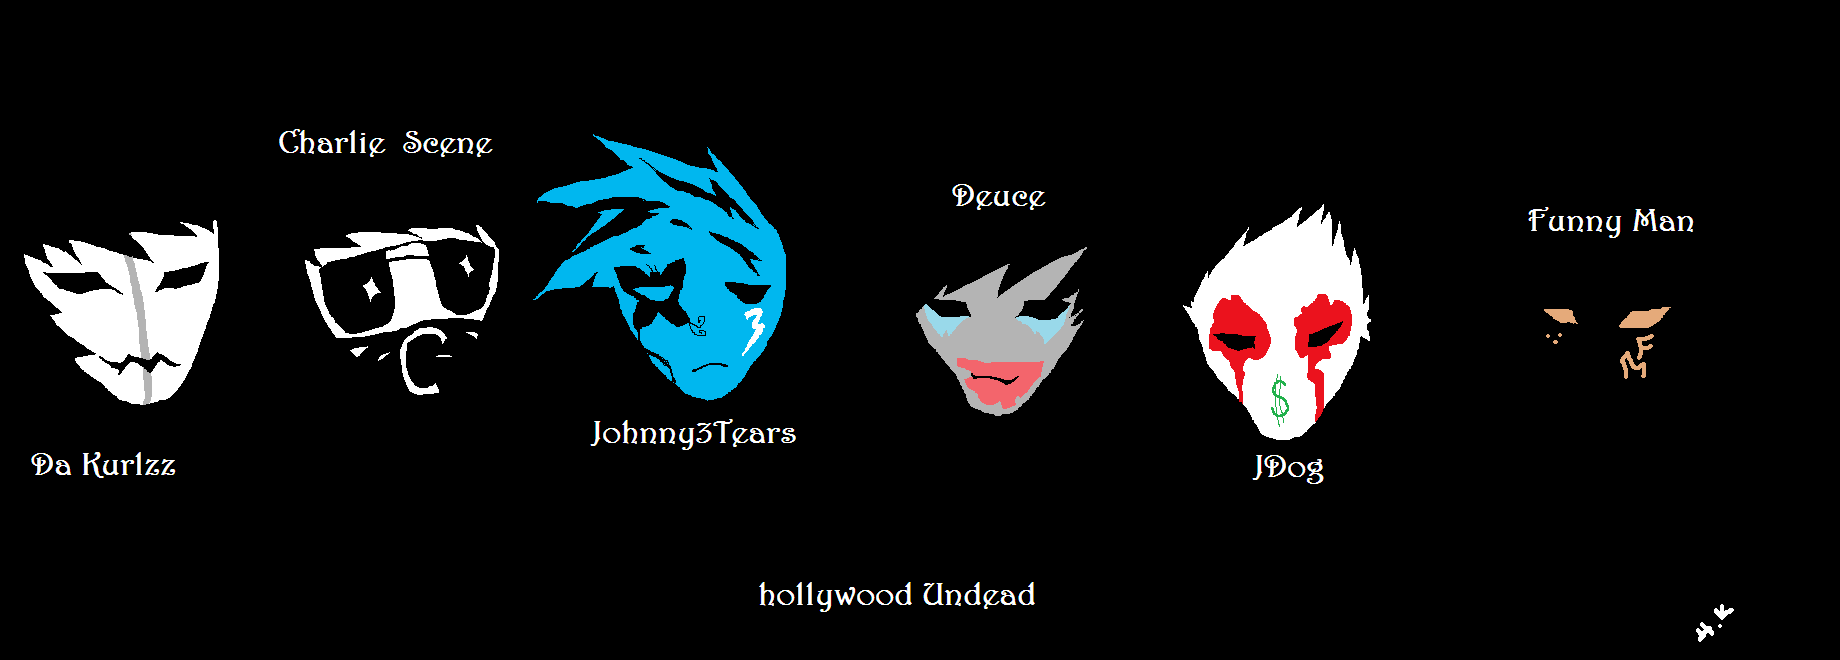 Hollywood Undead Wallpaper By Weletobloodstone HD Walls Find